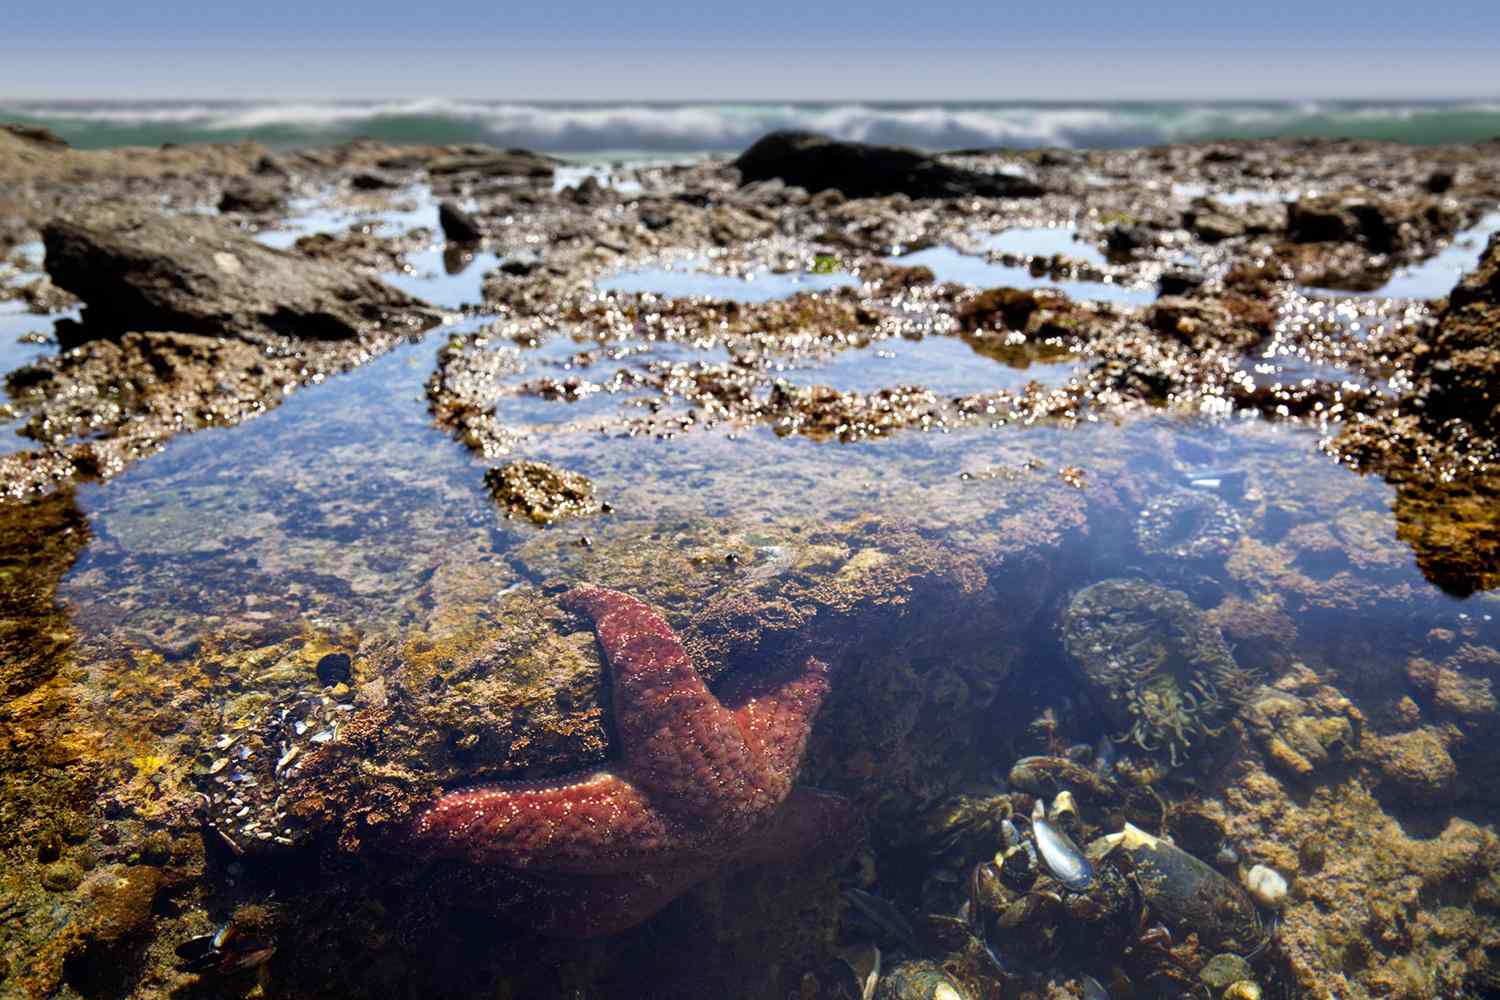 Coast Tide Pool Close Up Showing Fauna, Starfish and Seaweed and scatted rocks under clear pool of sea water.